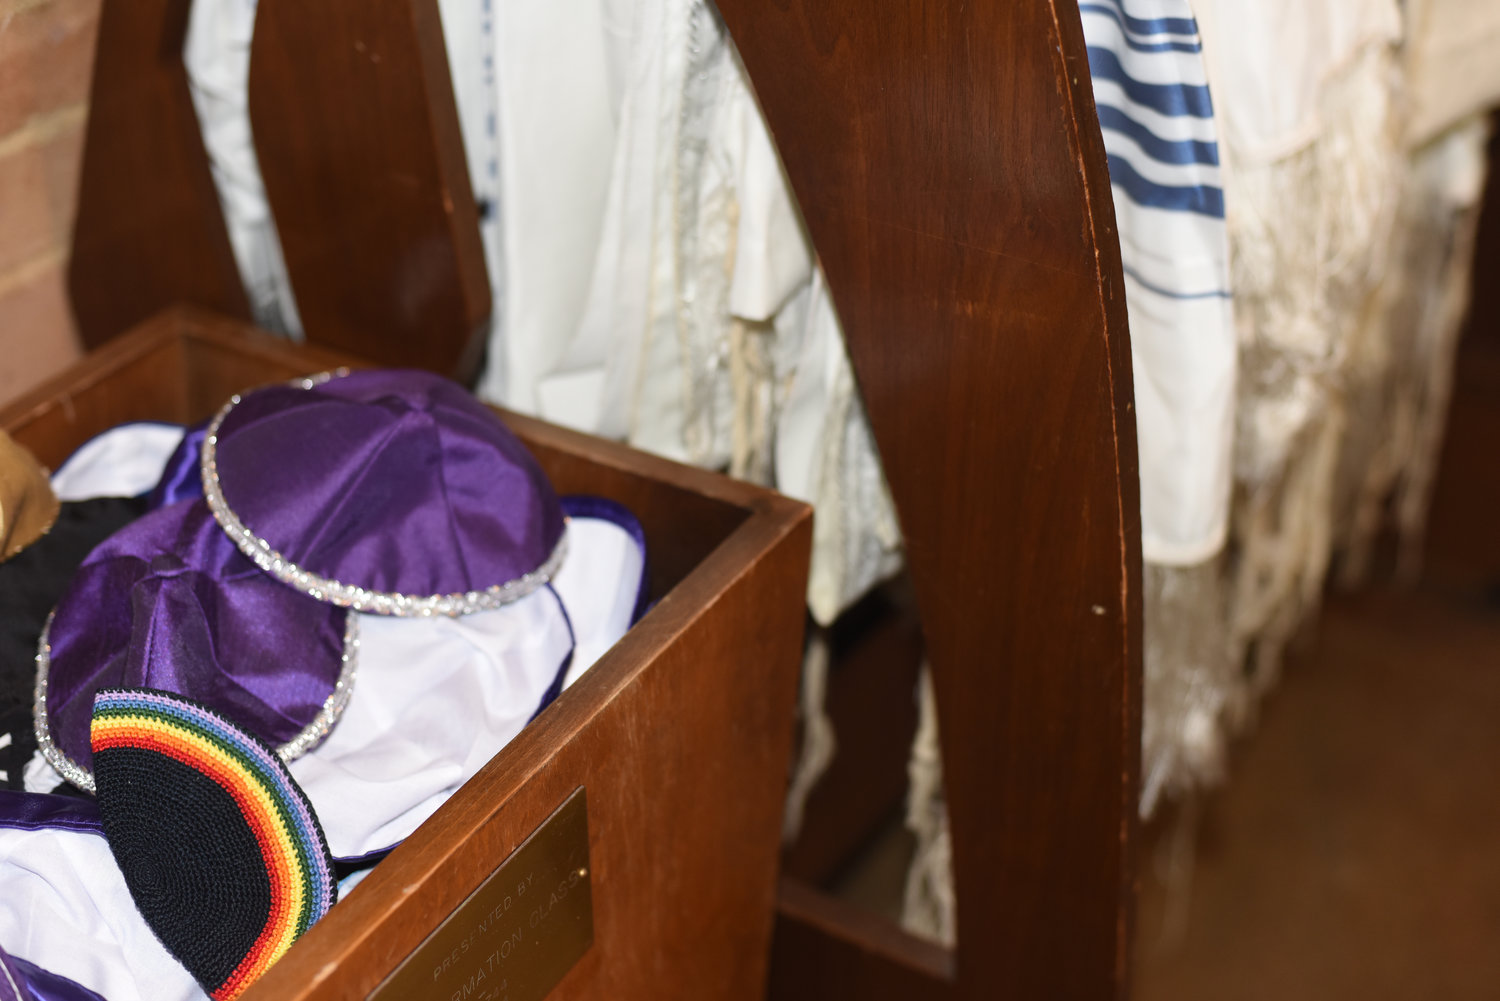 Sherry Kassel donated a Pride-themed Yarmulke saying she had an extra. She hoped it would make another LGBTQ congregant feel comfortable at Riverdale Temple with their Jewish faith.